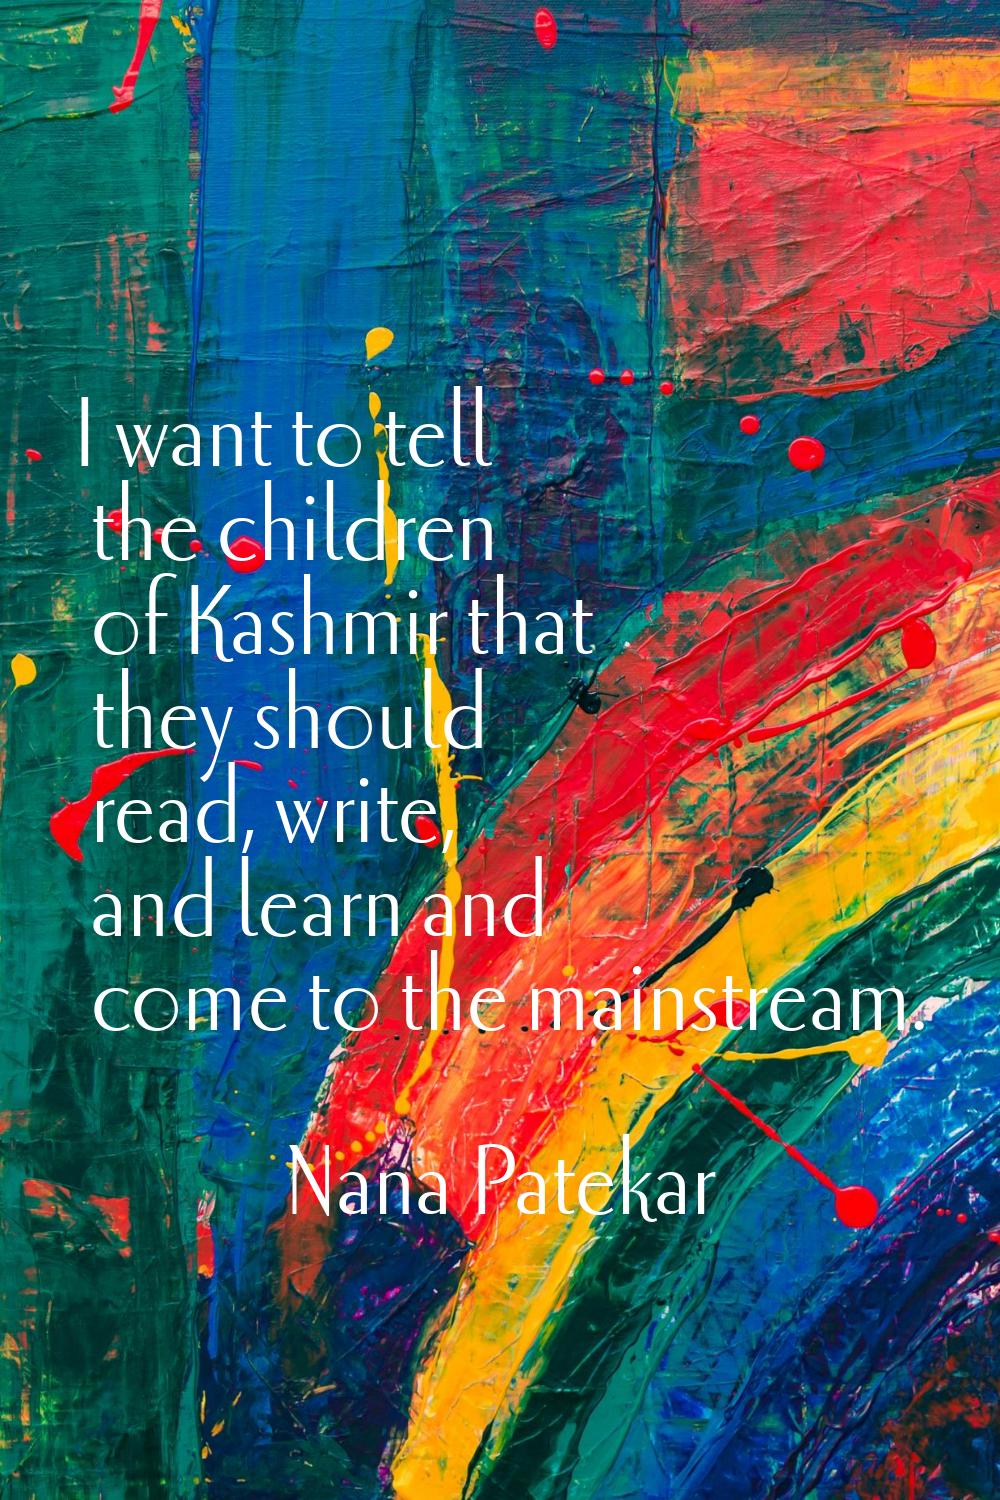 I want to tell the children of Kashmir that they should read, write, and learn and come to the main